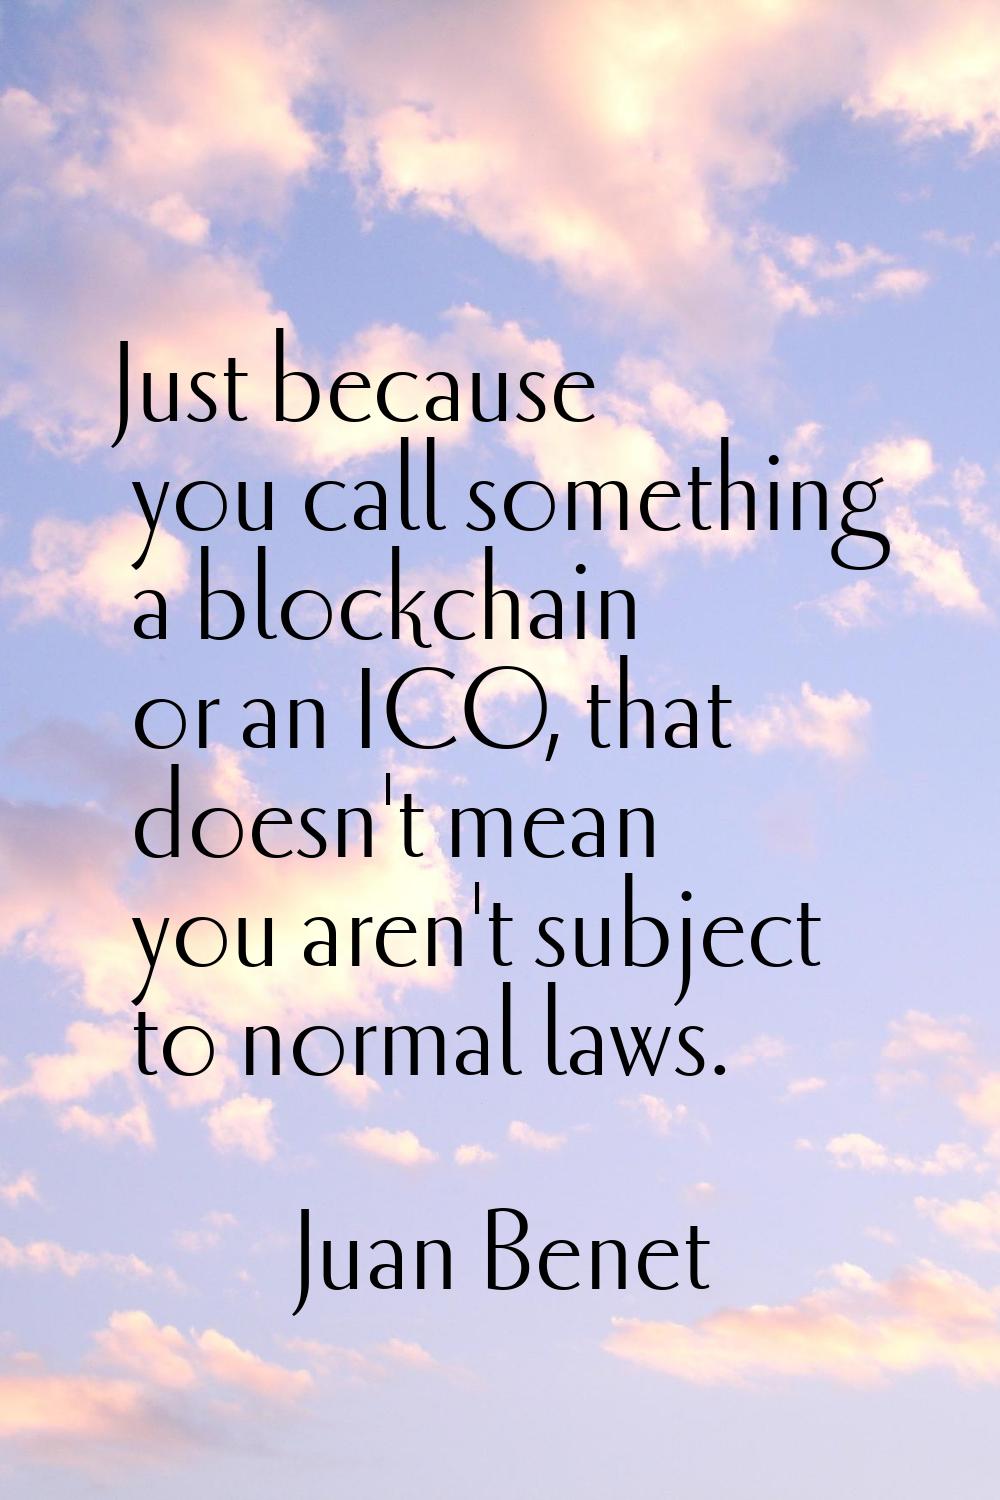 Just because you call something a blockchain or an ICO, that doesn't mean you aren't subject to nor